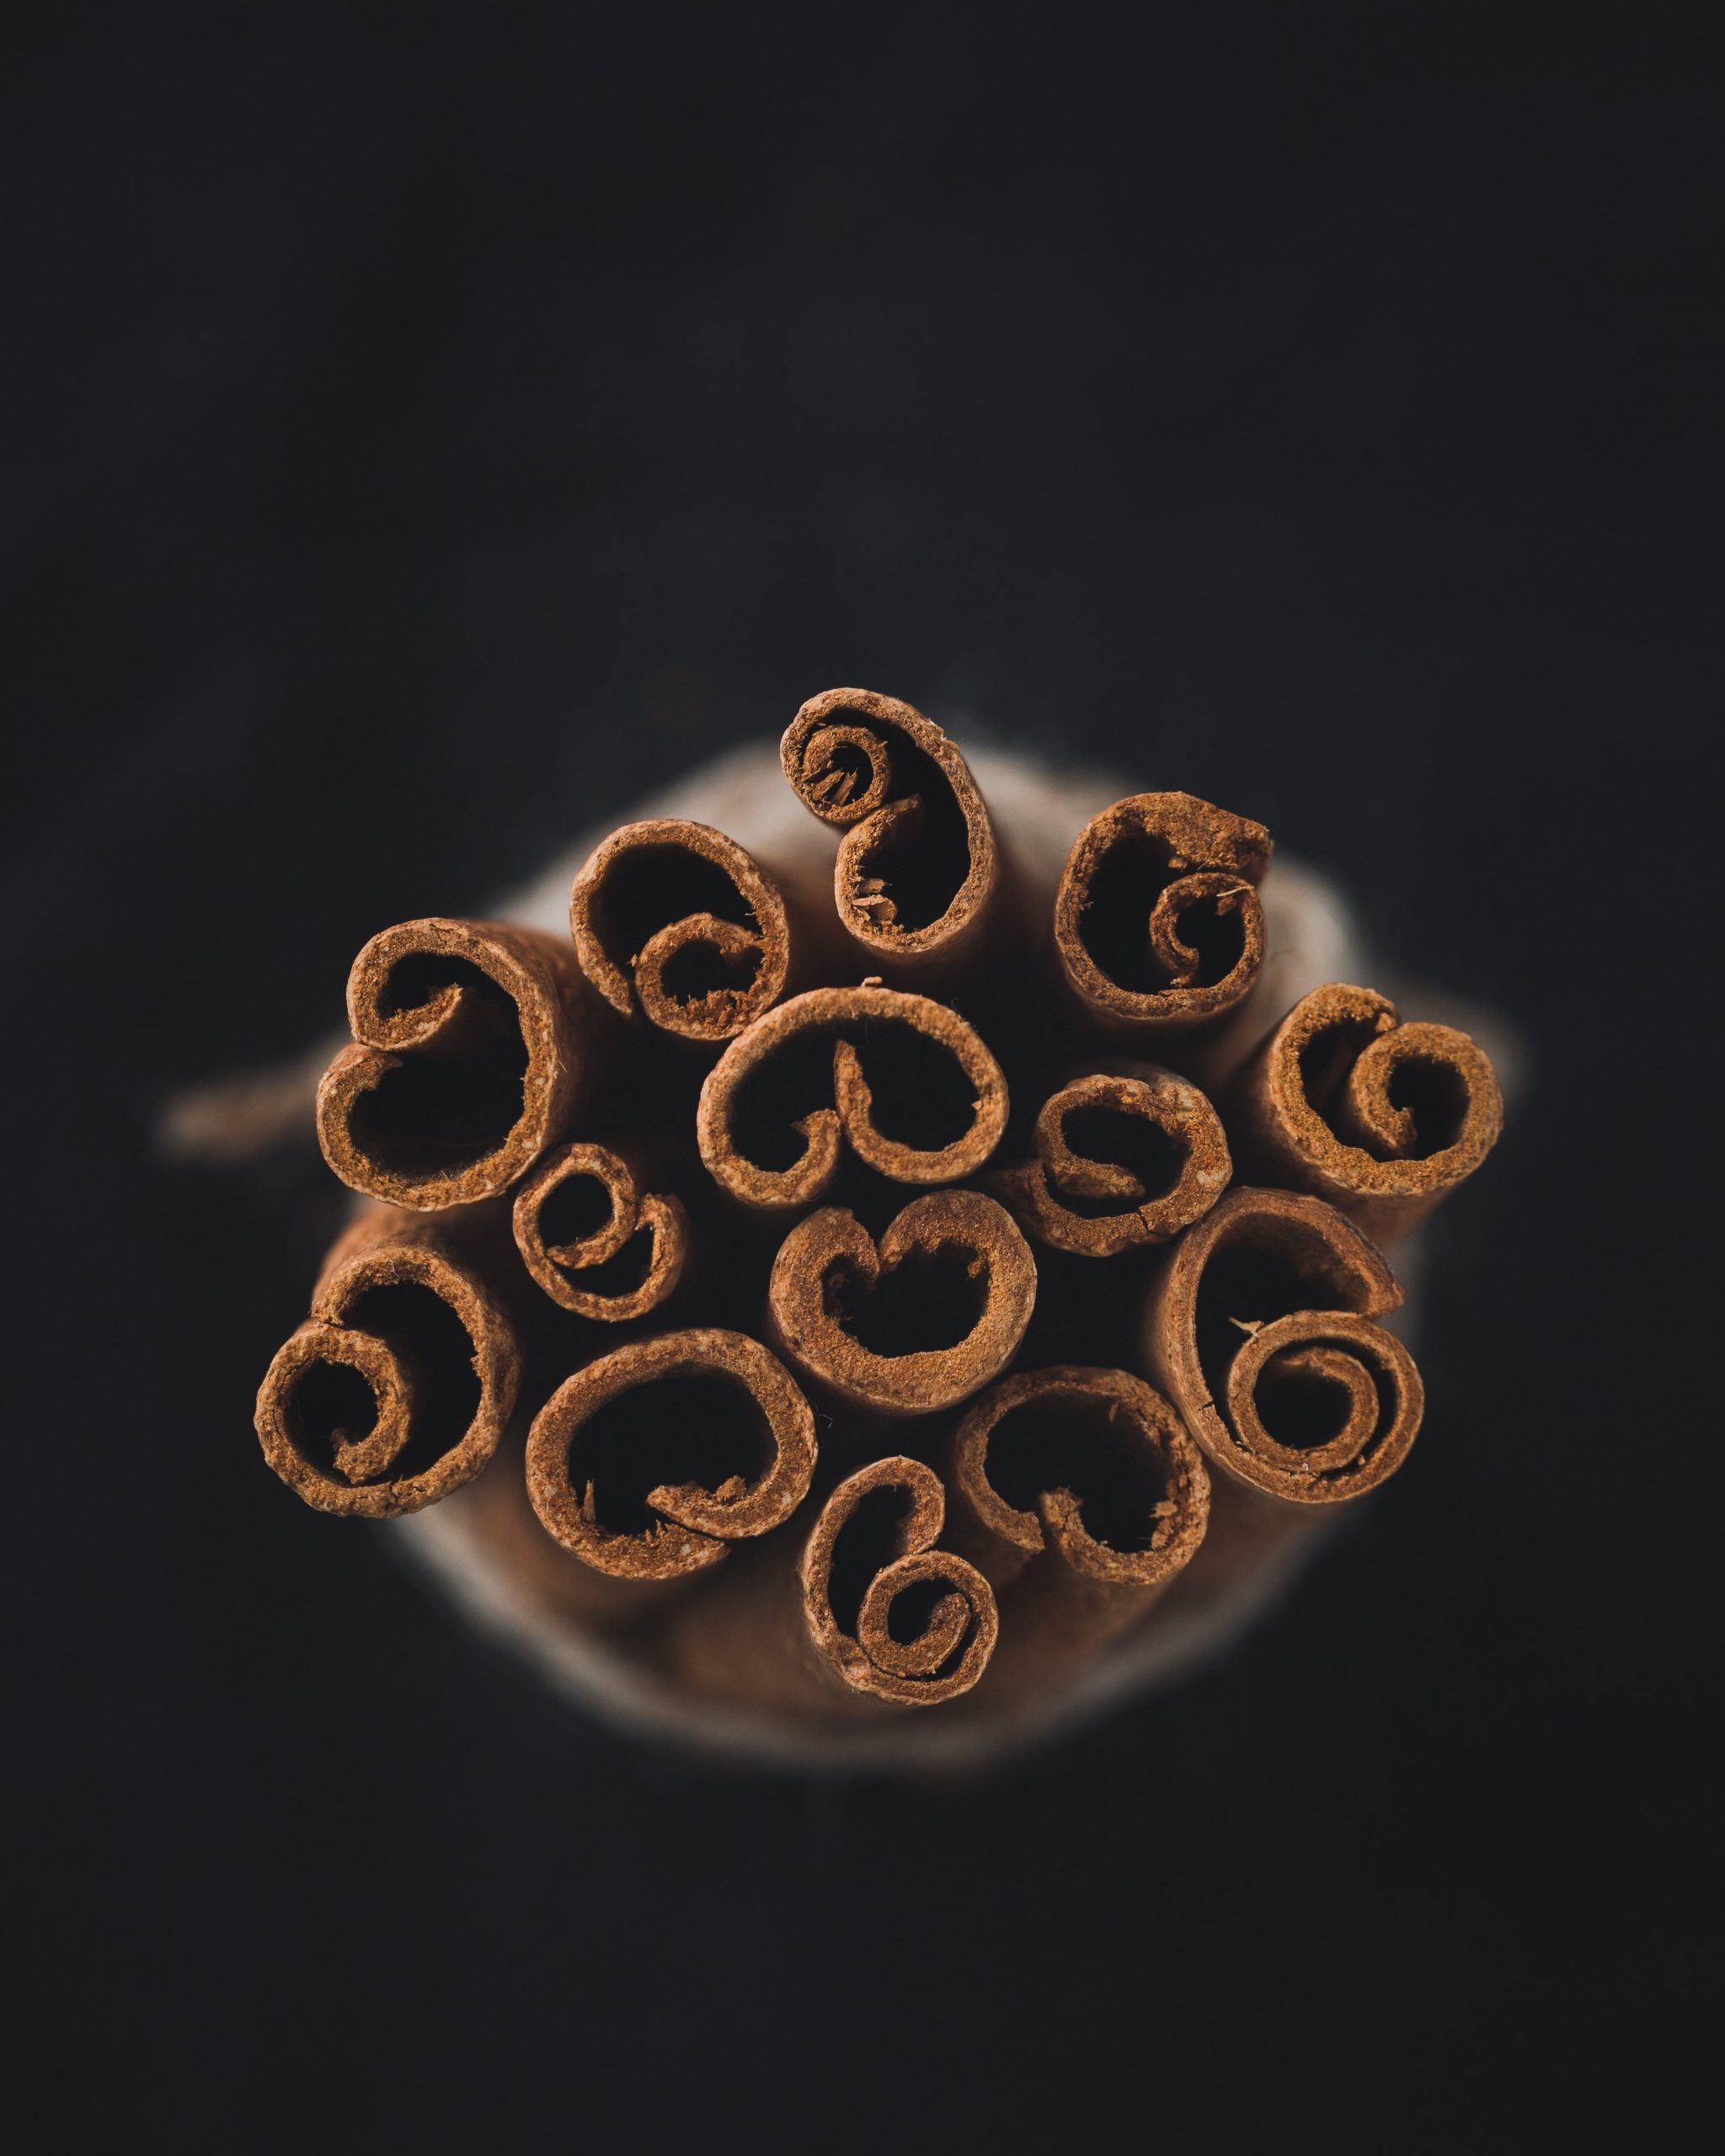 Aromatic cinnamon, Culinary inspiration, Flavorful spice, Delicious desserts, 2050x2560 HD Handy